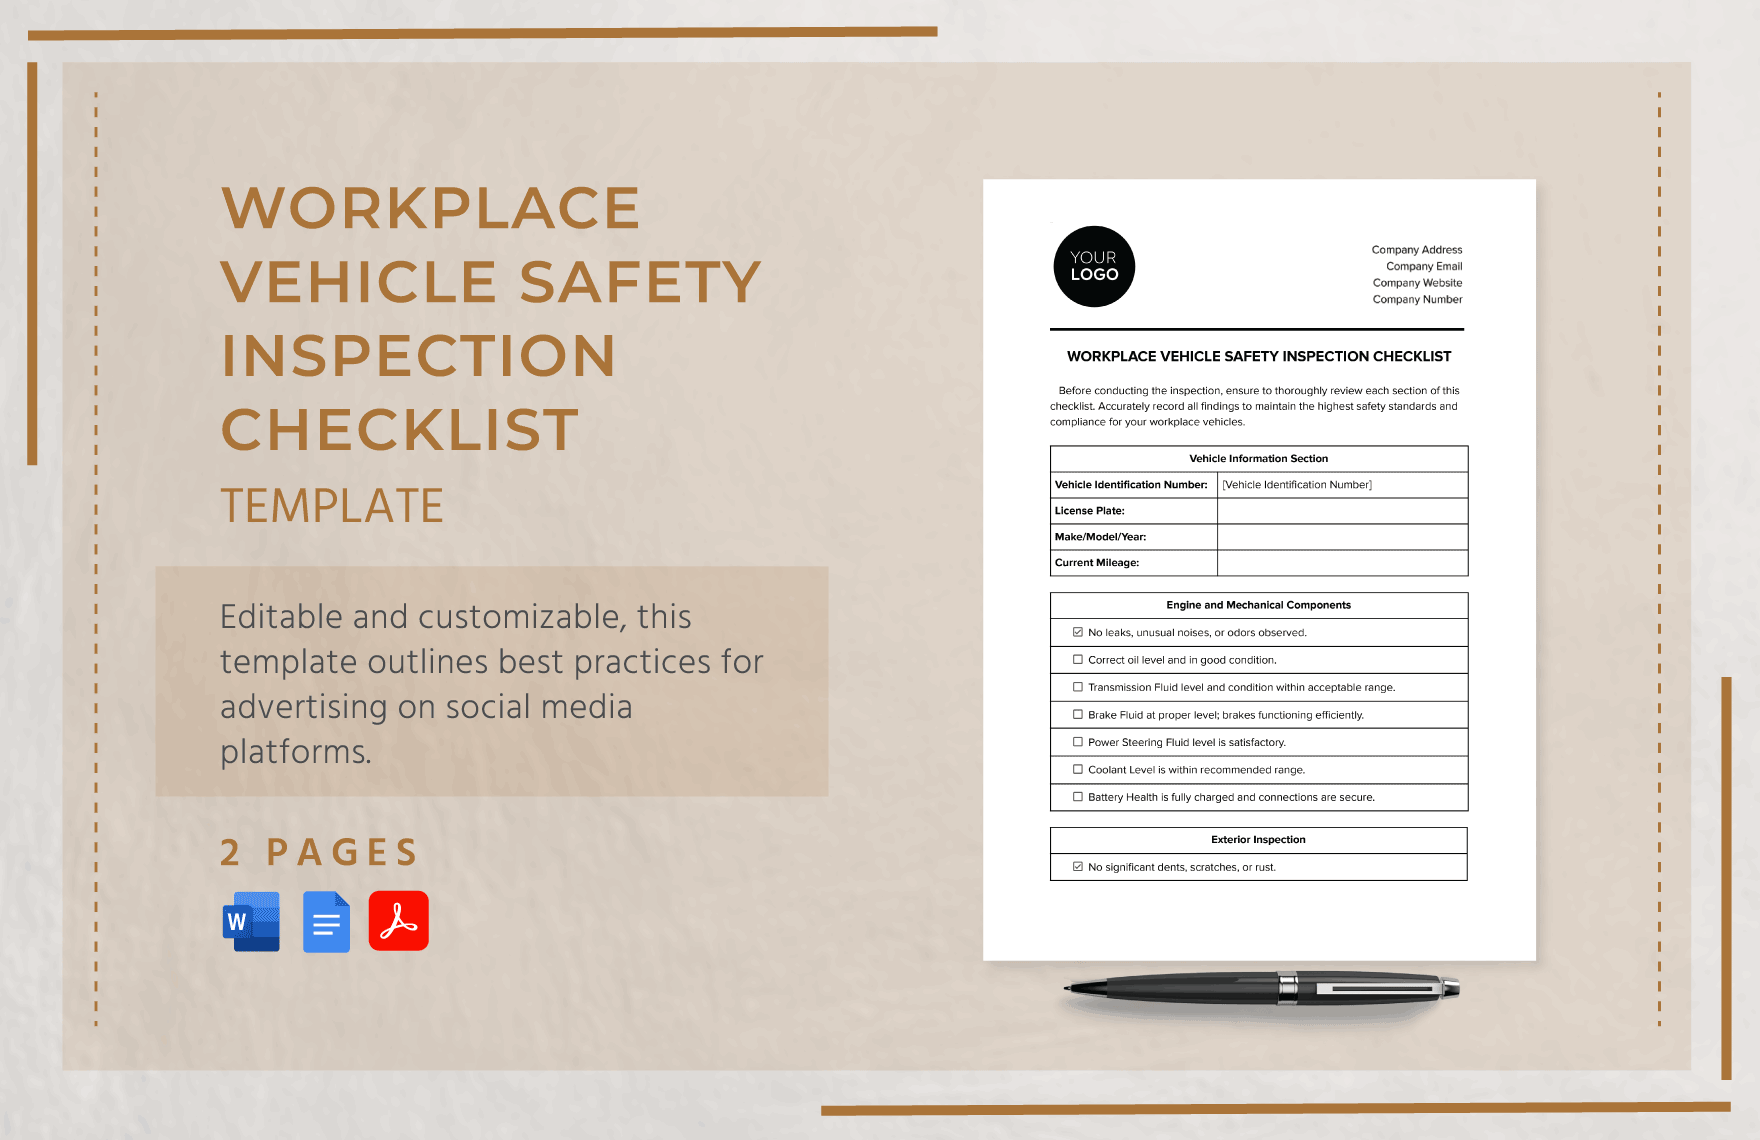 Workplace Vehicle Safety Inspection Checklist Template